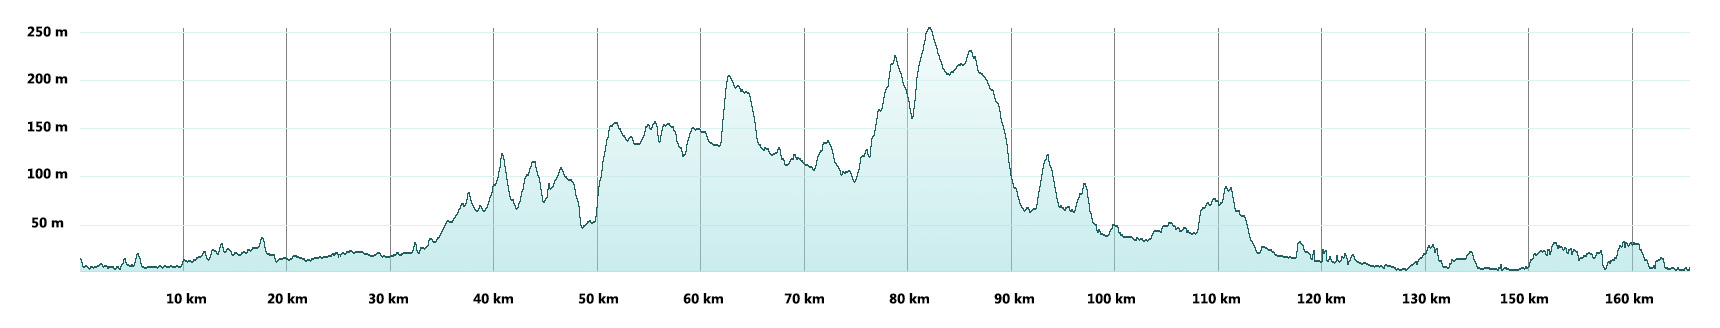 Hadrian’s Cycleway Route Profile